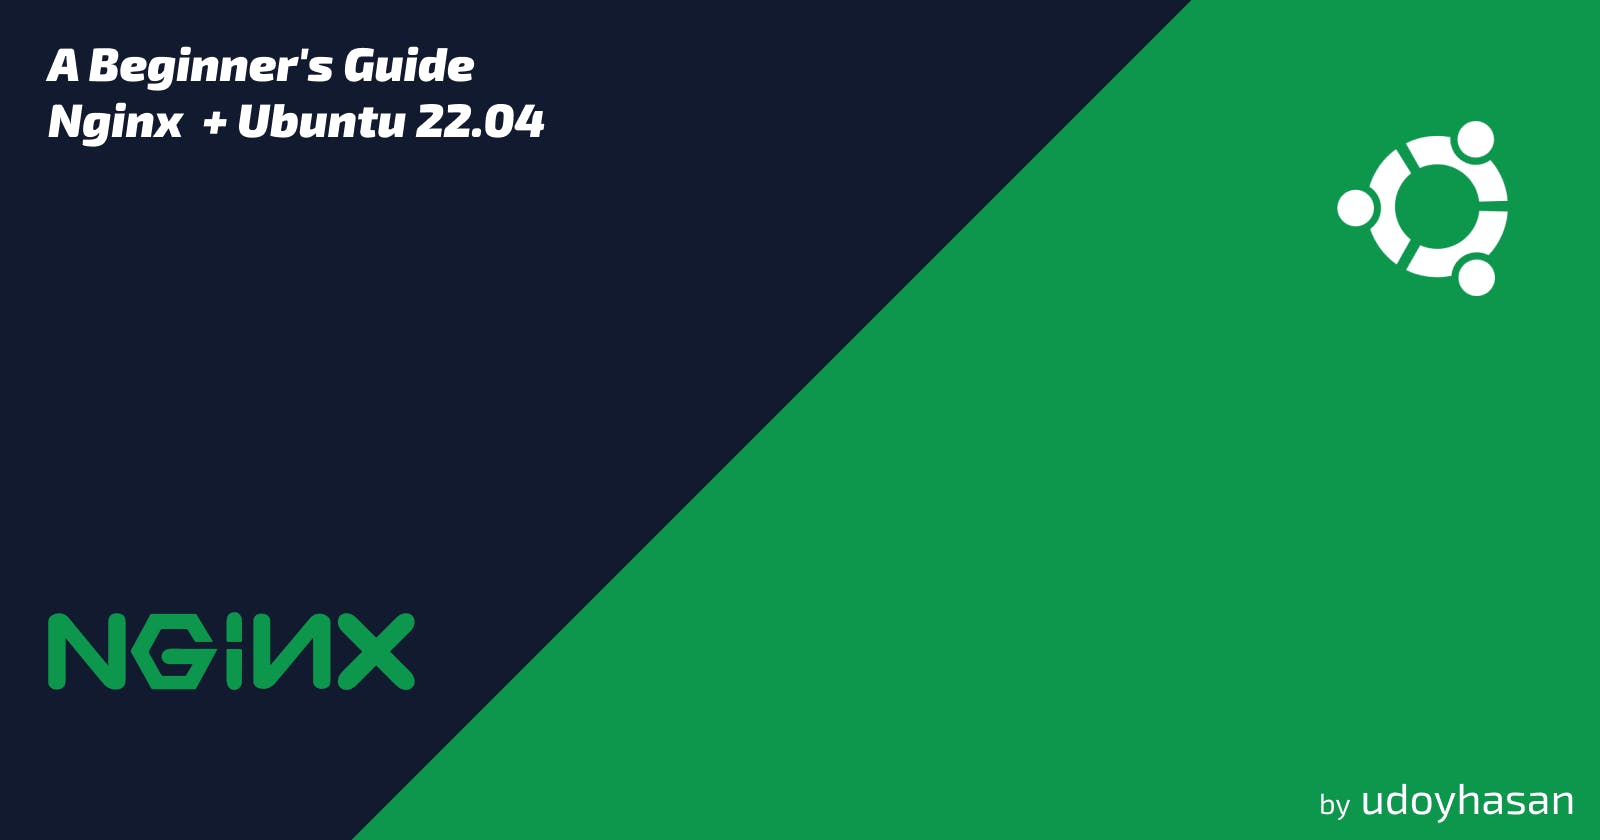 Beginner's Guide to Install and Configure Nginx on Ubuntu 22.04: Step-by-Step Tutorial